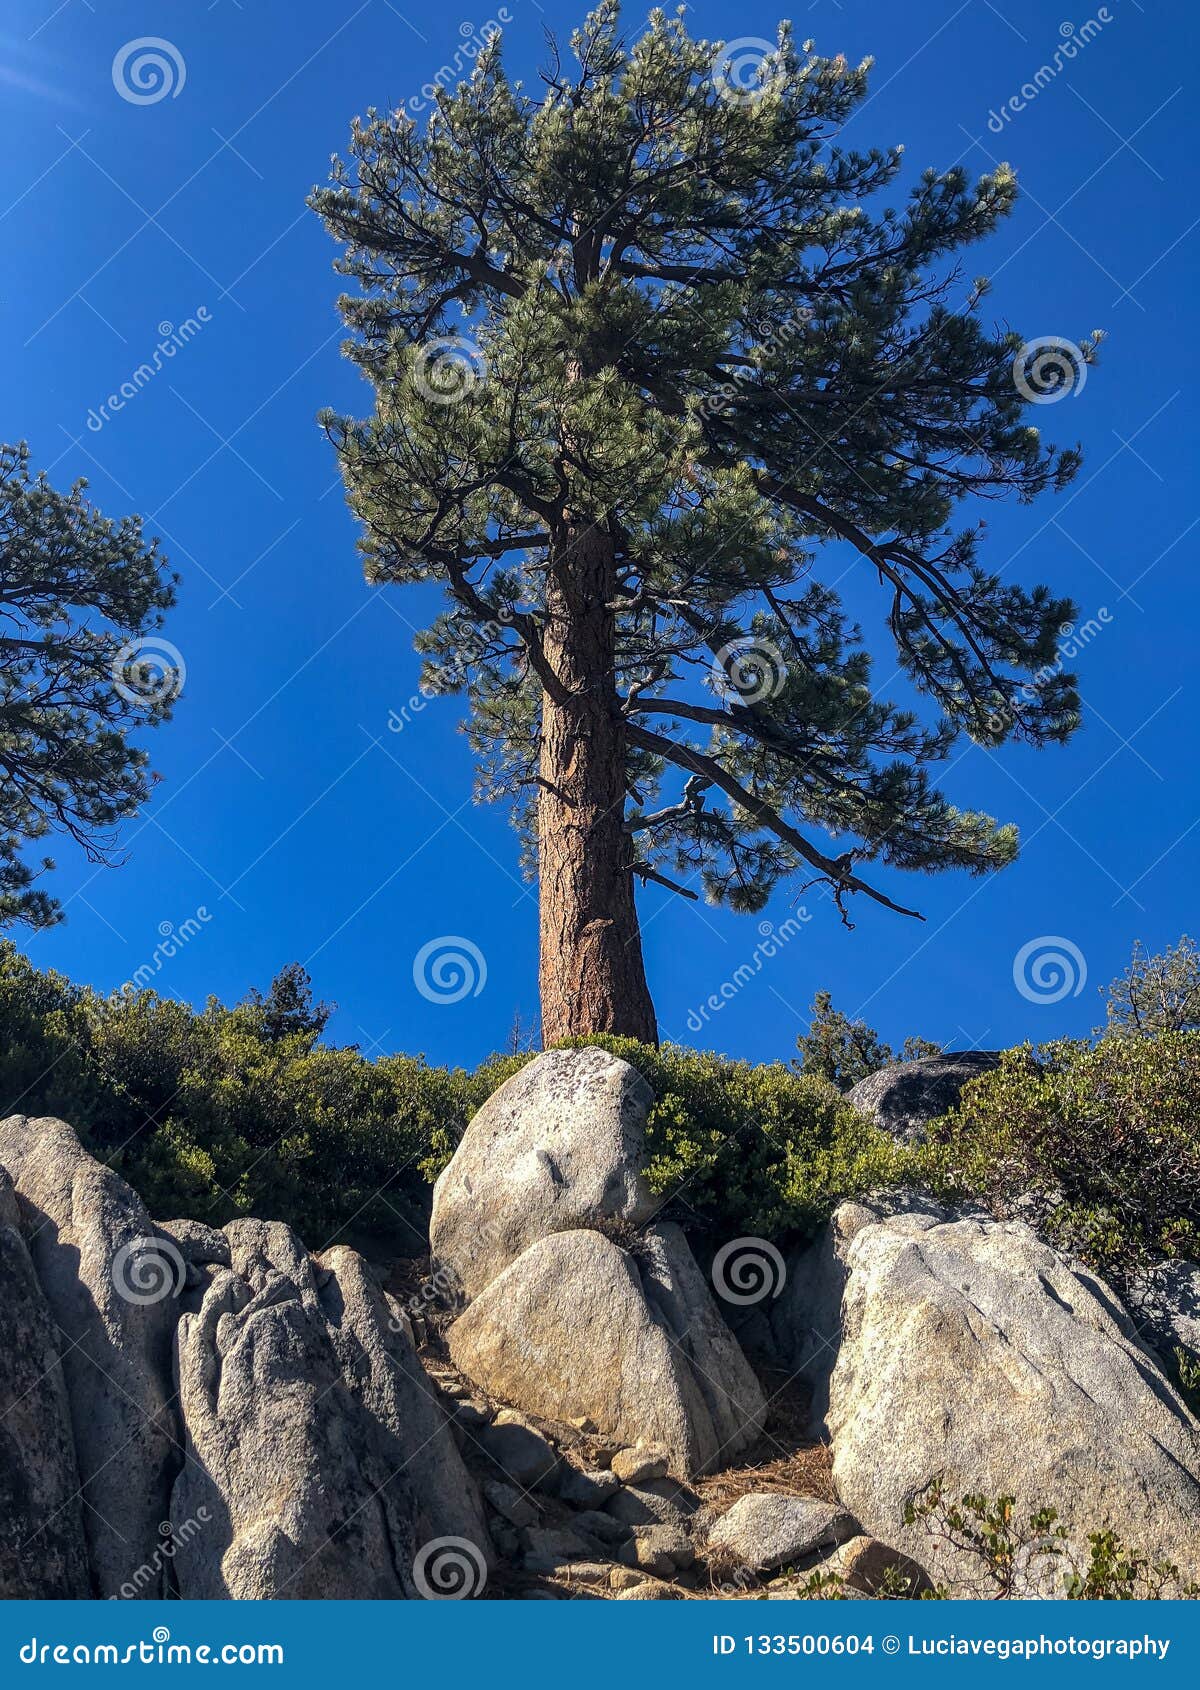 Windy Day Branches Blowing Pine Tree Stock Photo - Image of valley